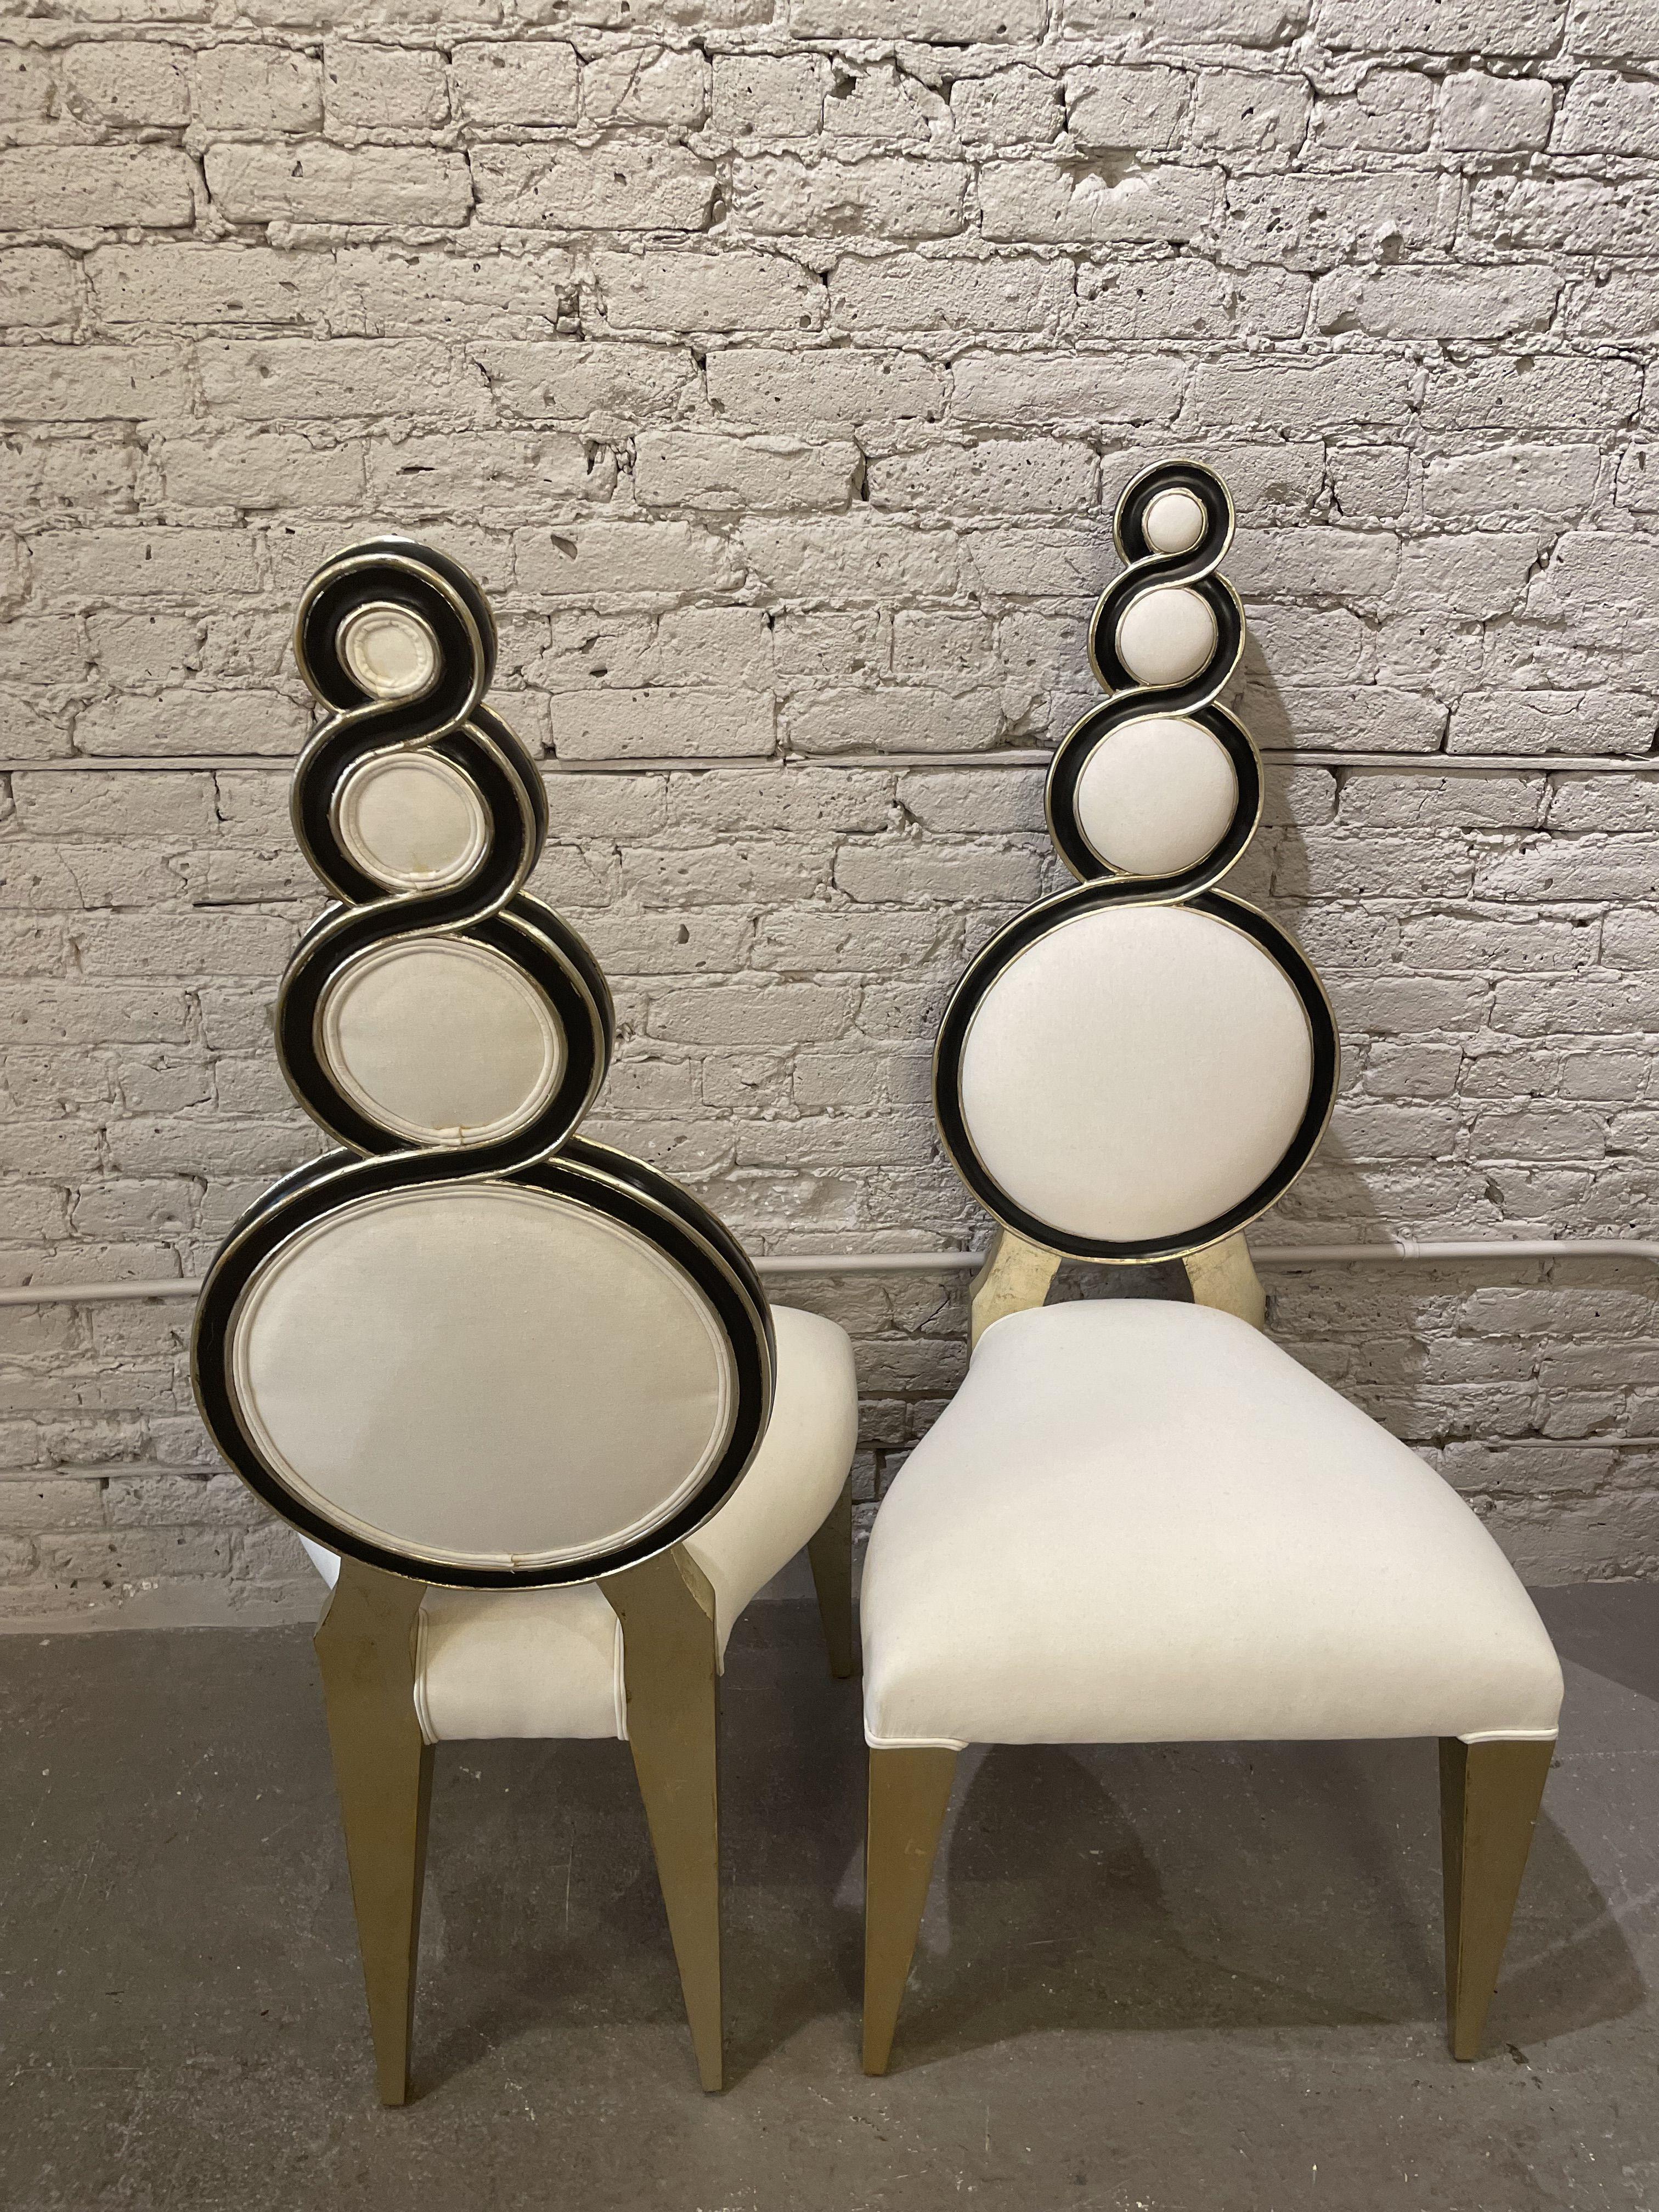 Enamel 1950s Side Chairs - a Pair For Sale